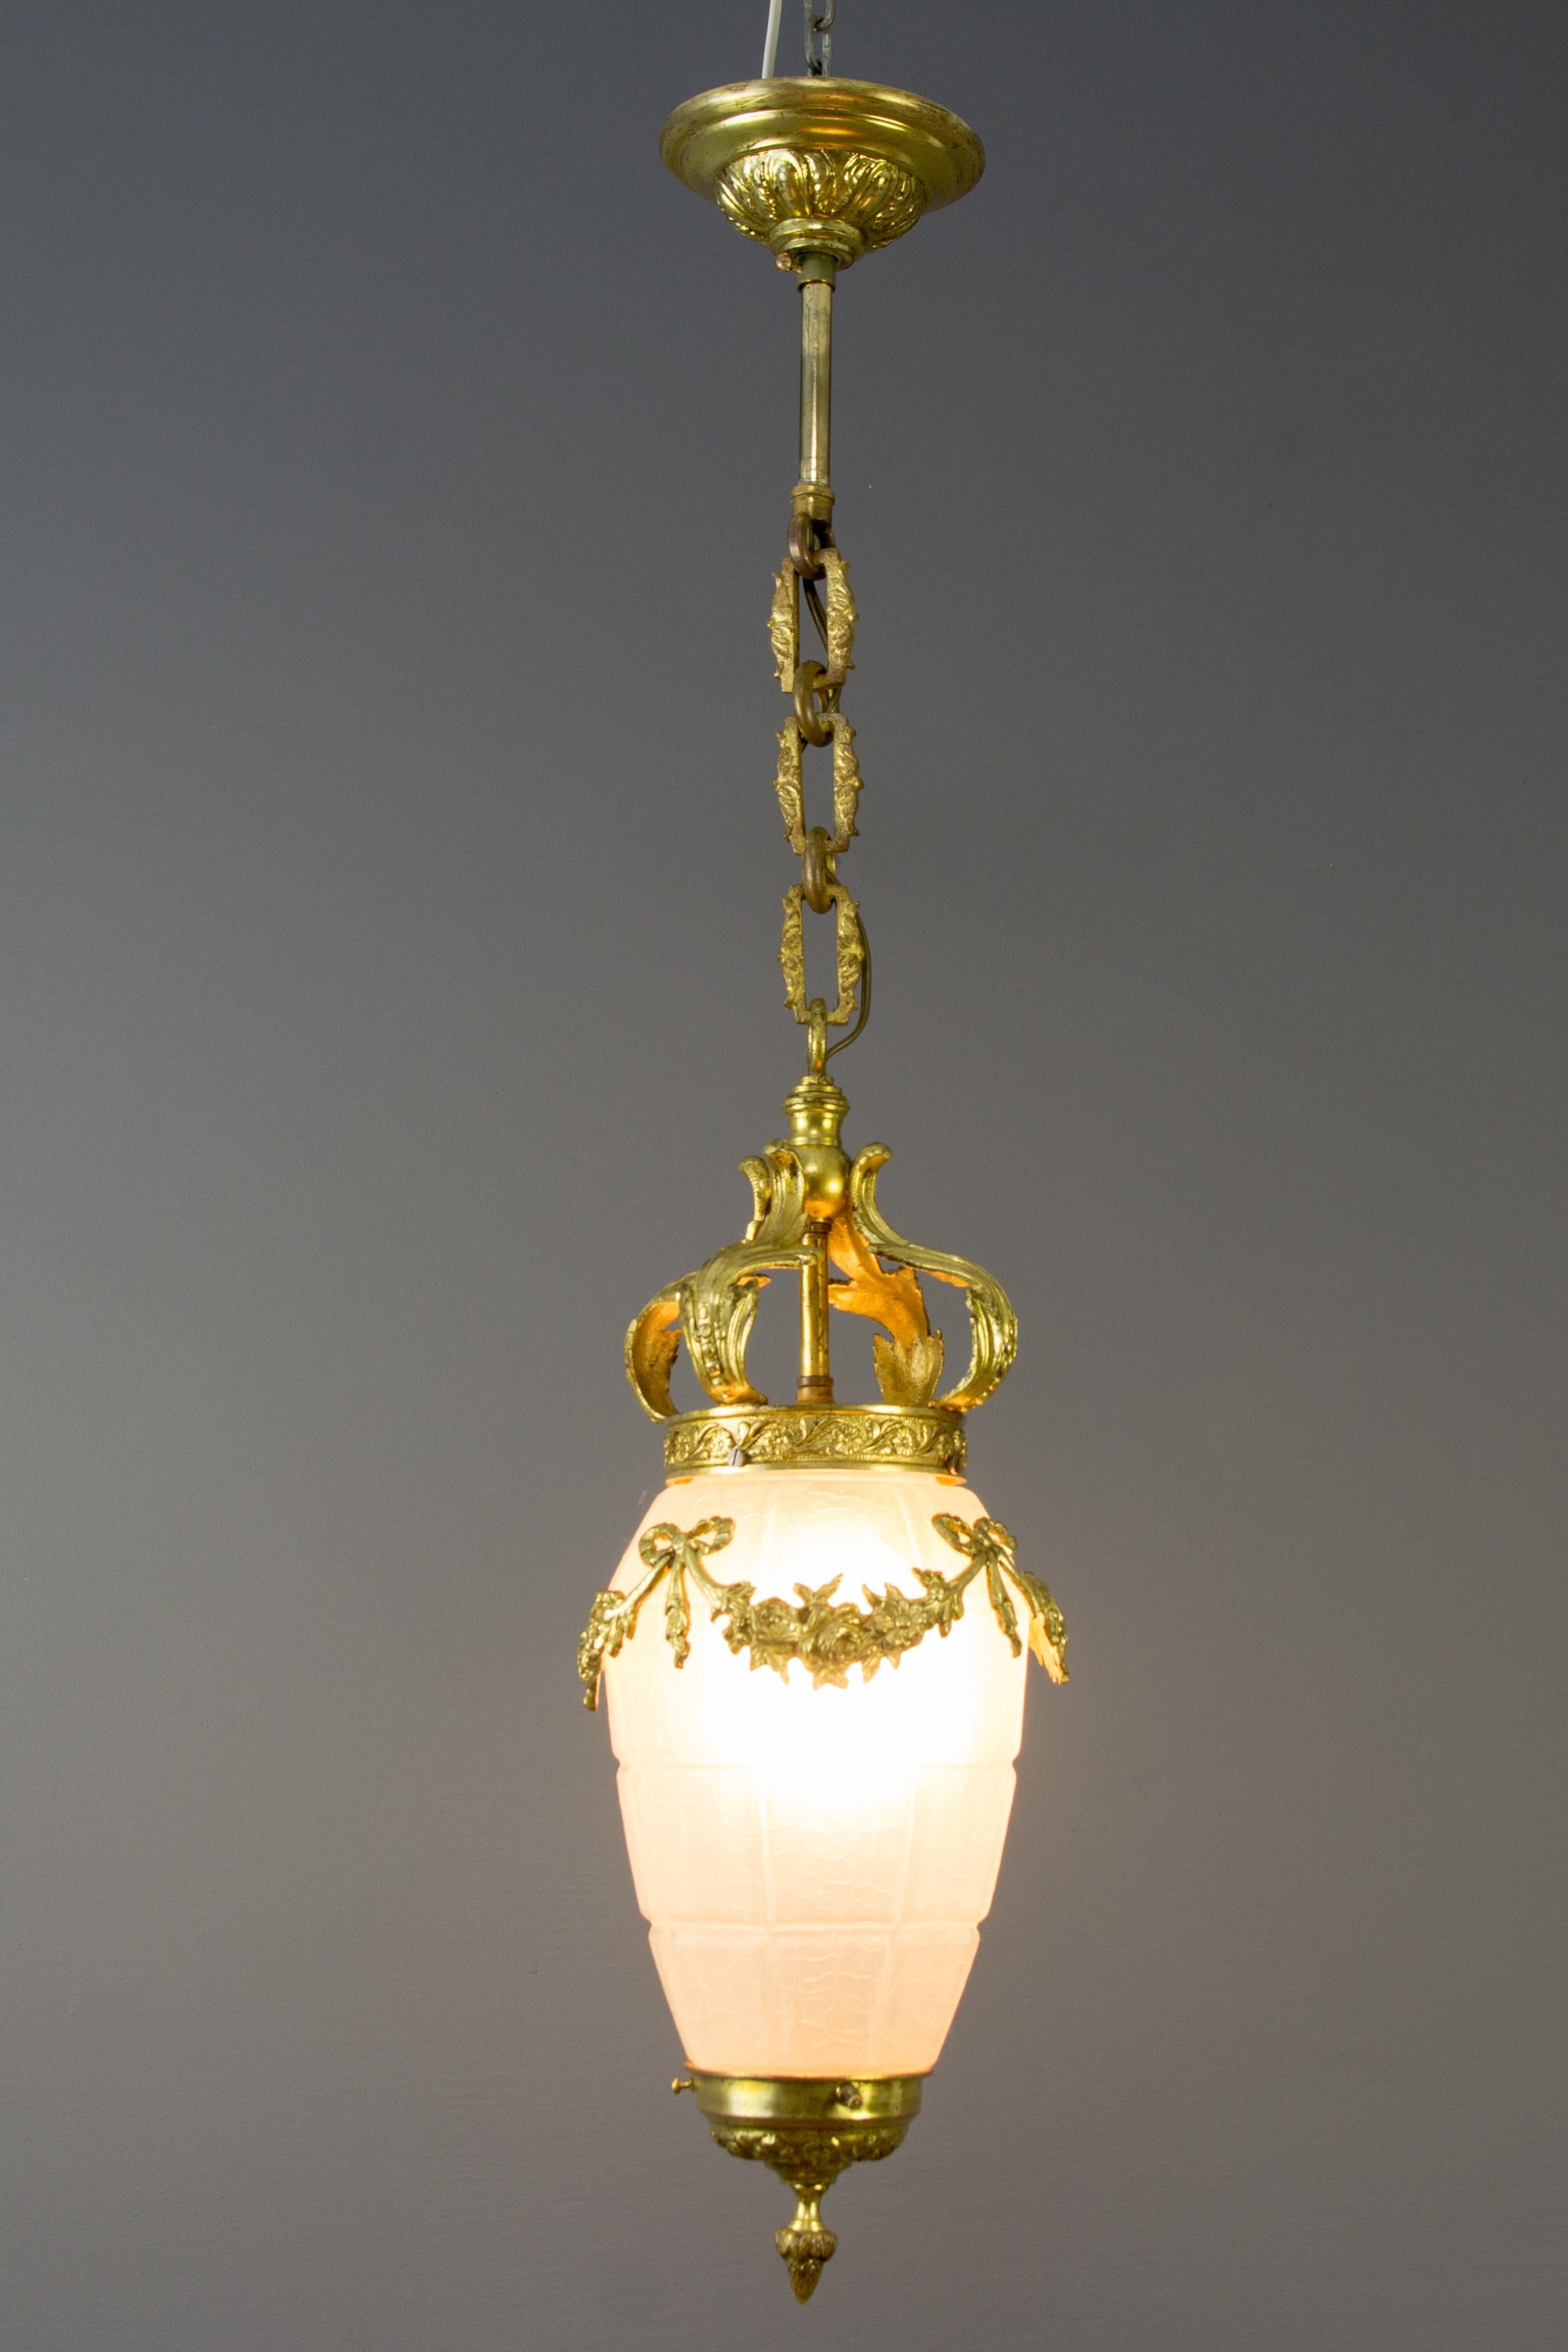 French Louis XVI style bronze, brass, and frosted crackled glass hall lantern, ceiling lamp from the 1930s.
In very good condition, one original socket for the E27 light bulb.
Measures: Height is 33.07 inches / 84 cm; diameter - 7.08 inches / 18